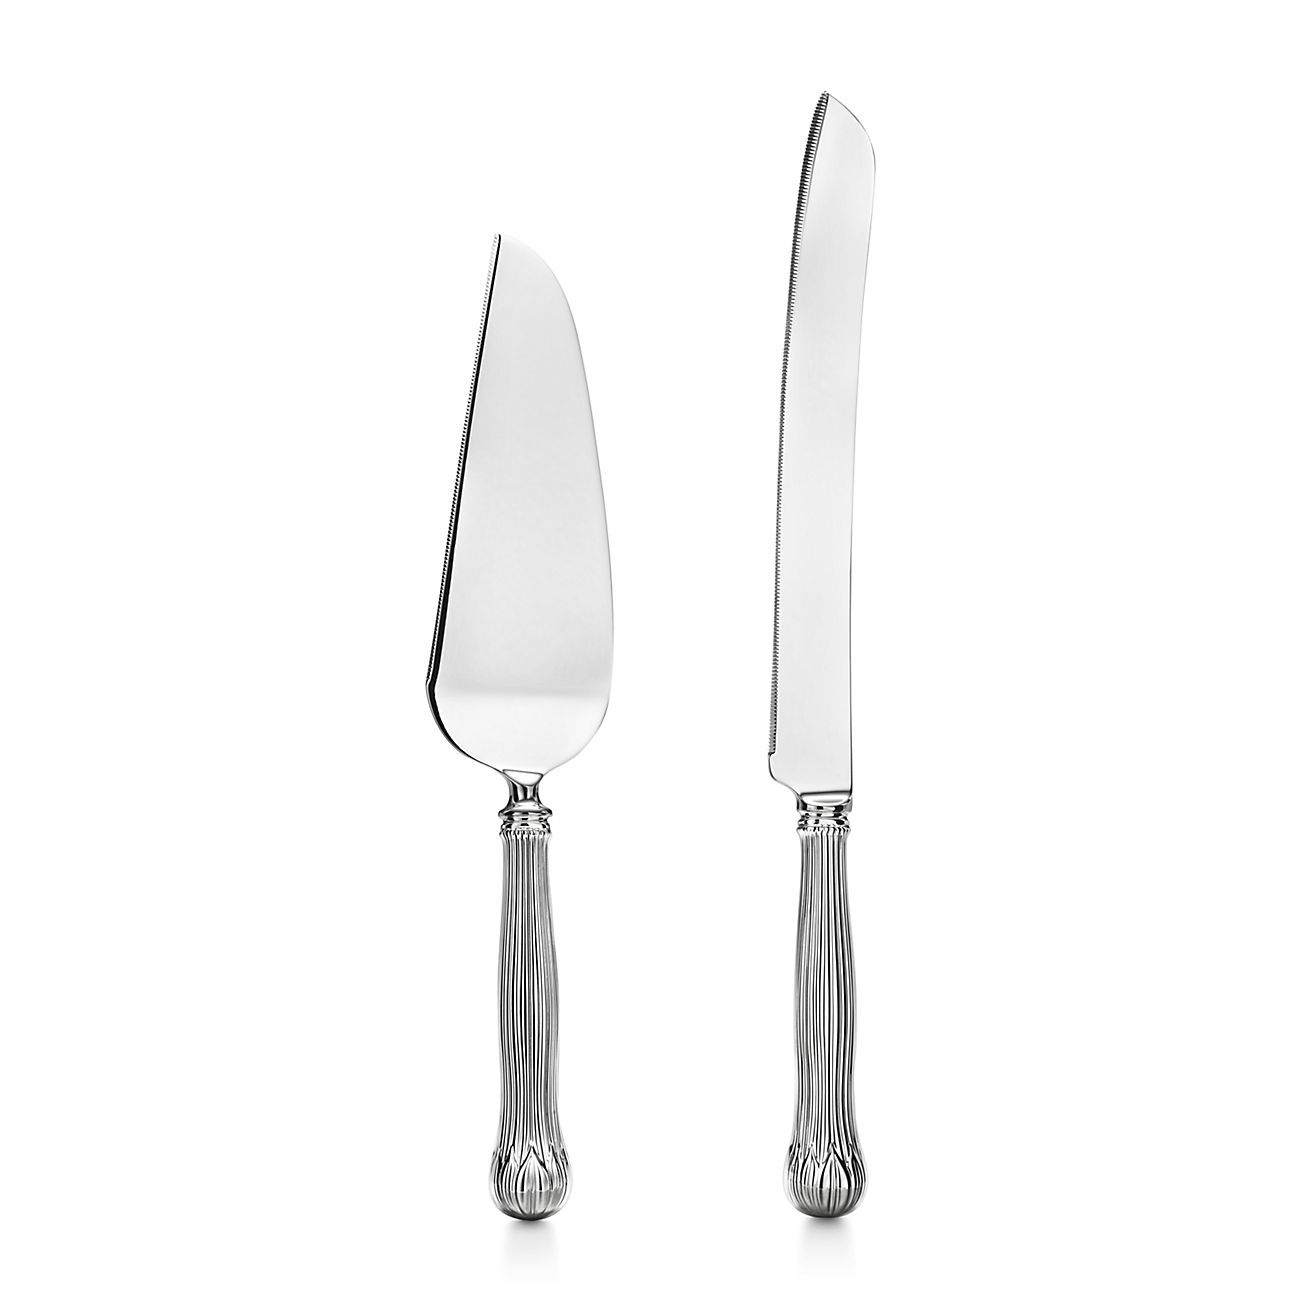 Stainless Steel Cake Knife and Server Set with Acrylic Handle Hand Tool |  eBay